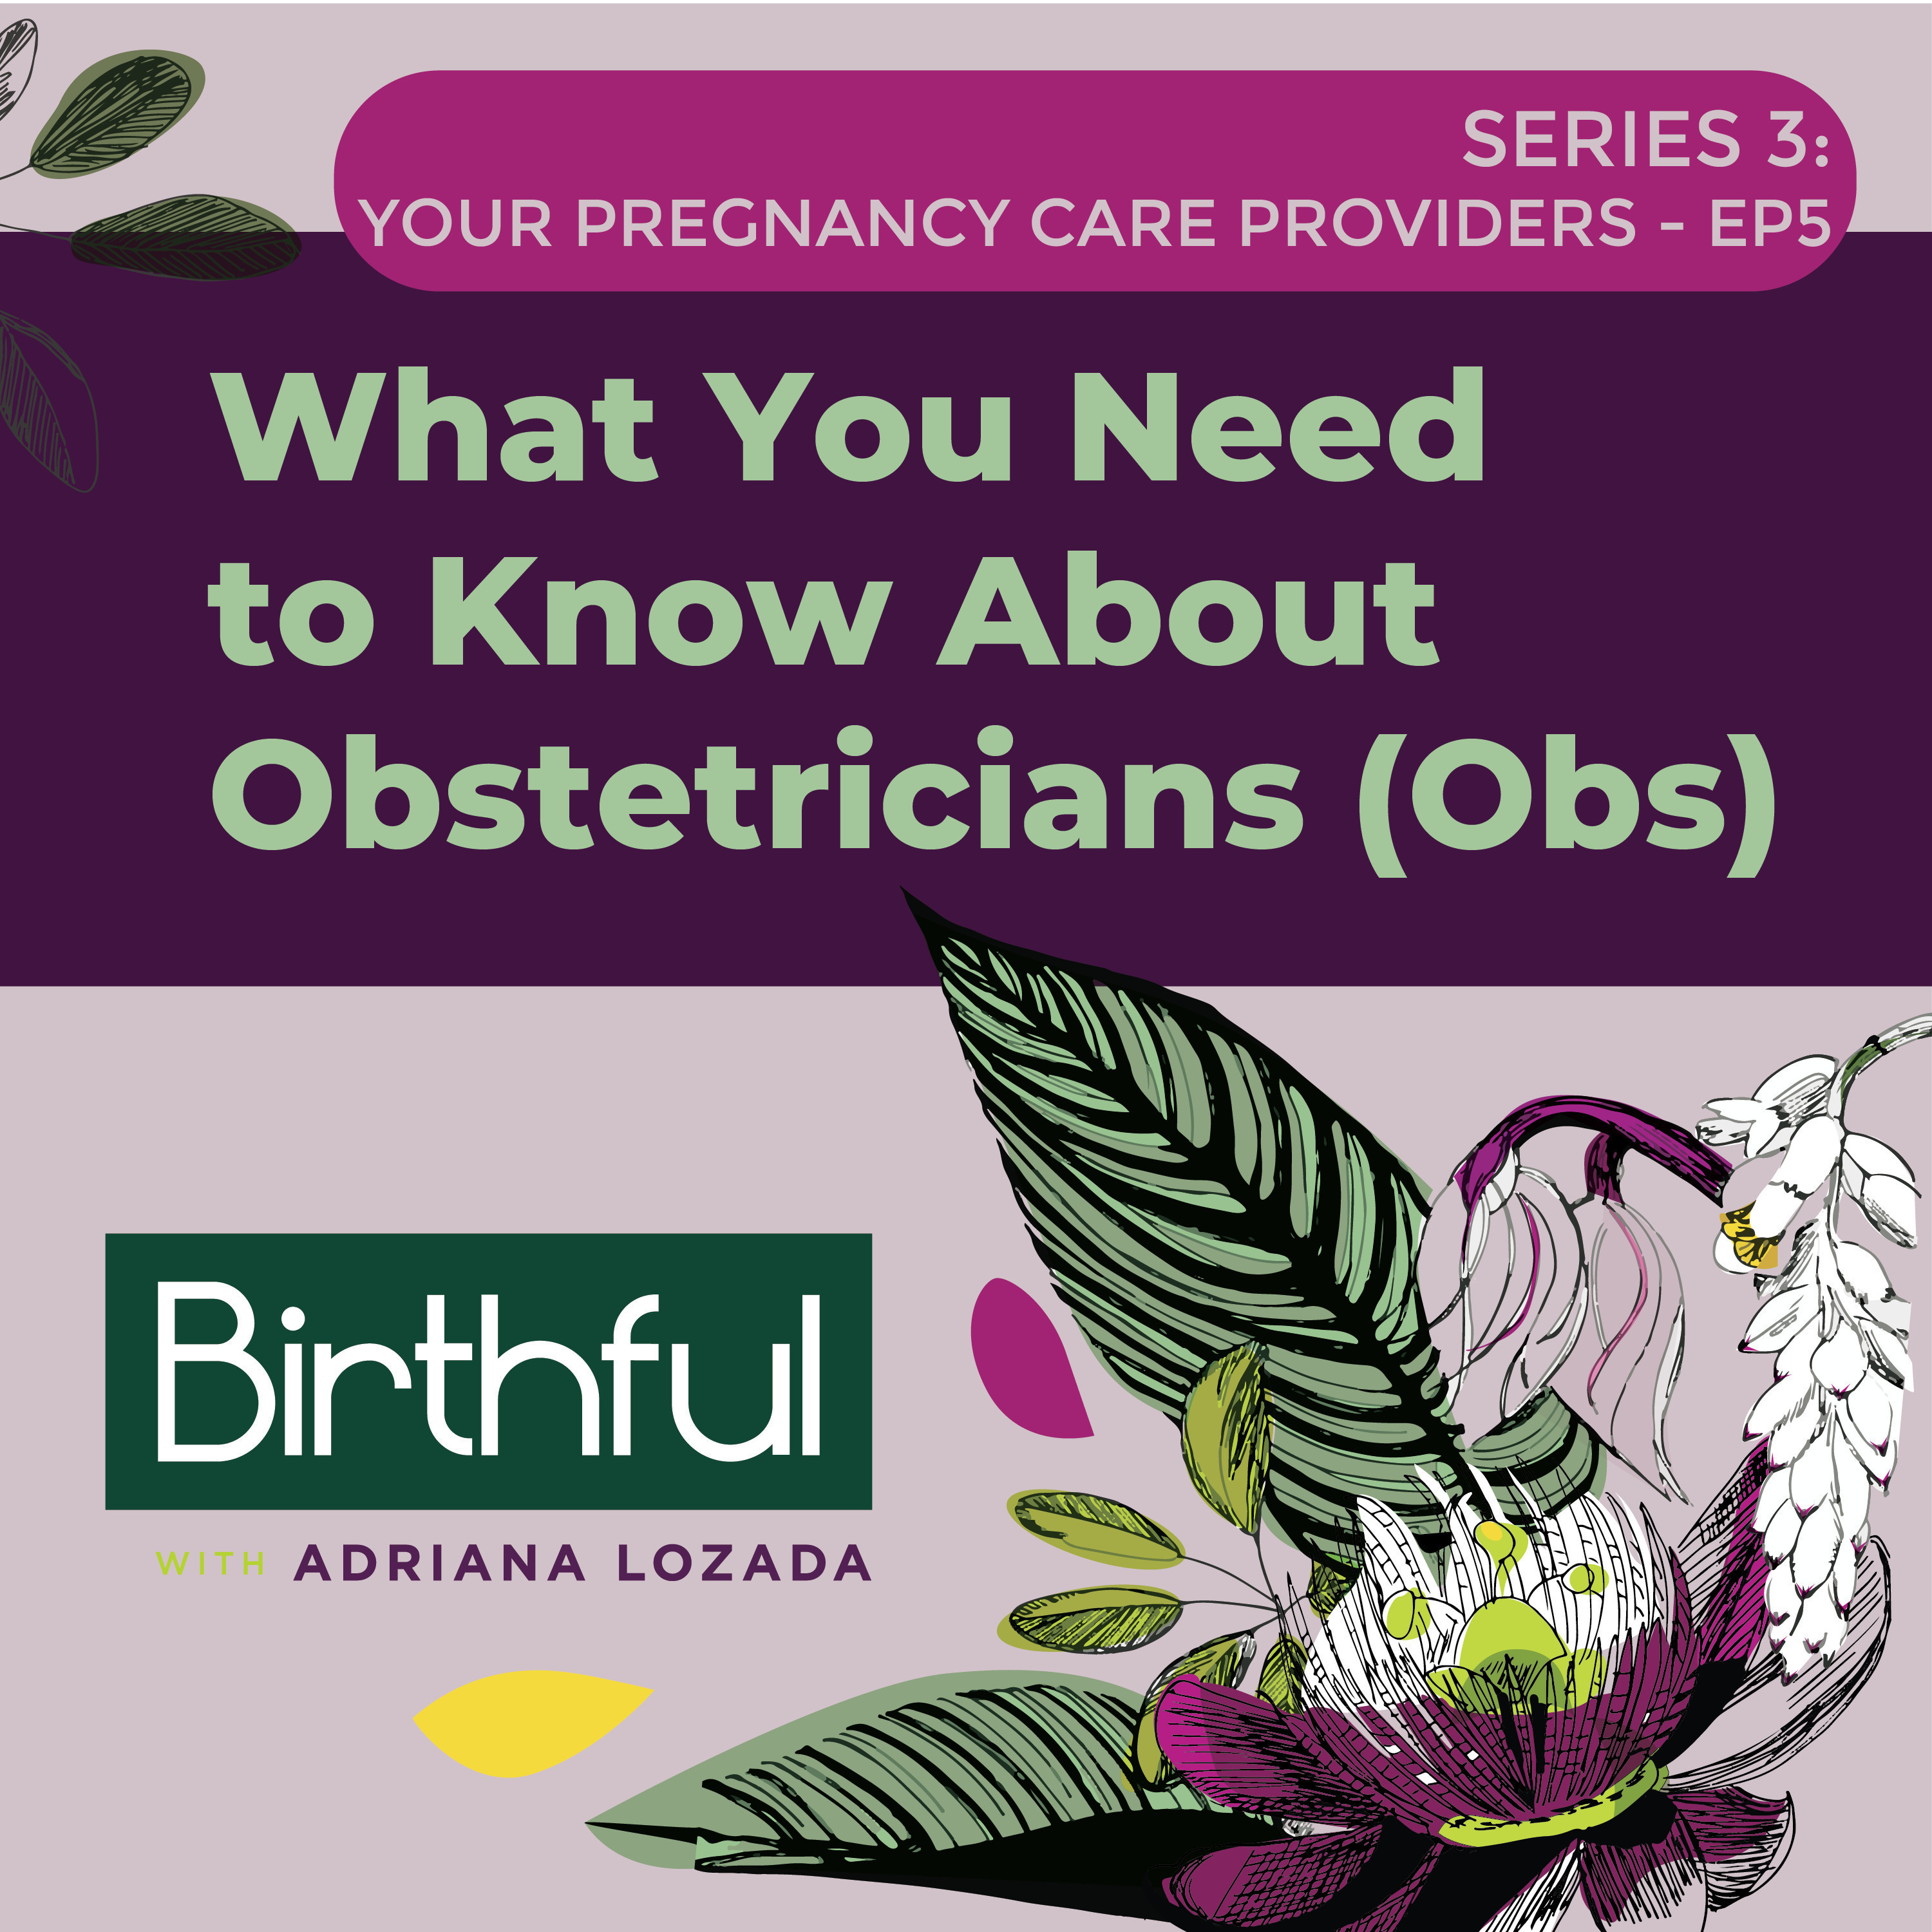 What You Need to Know About Obstetricians (Obs)